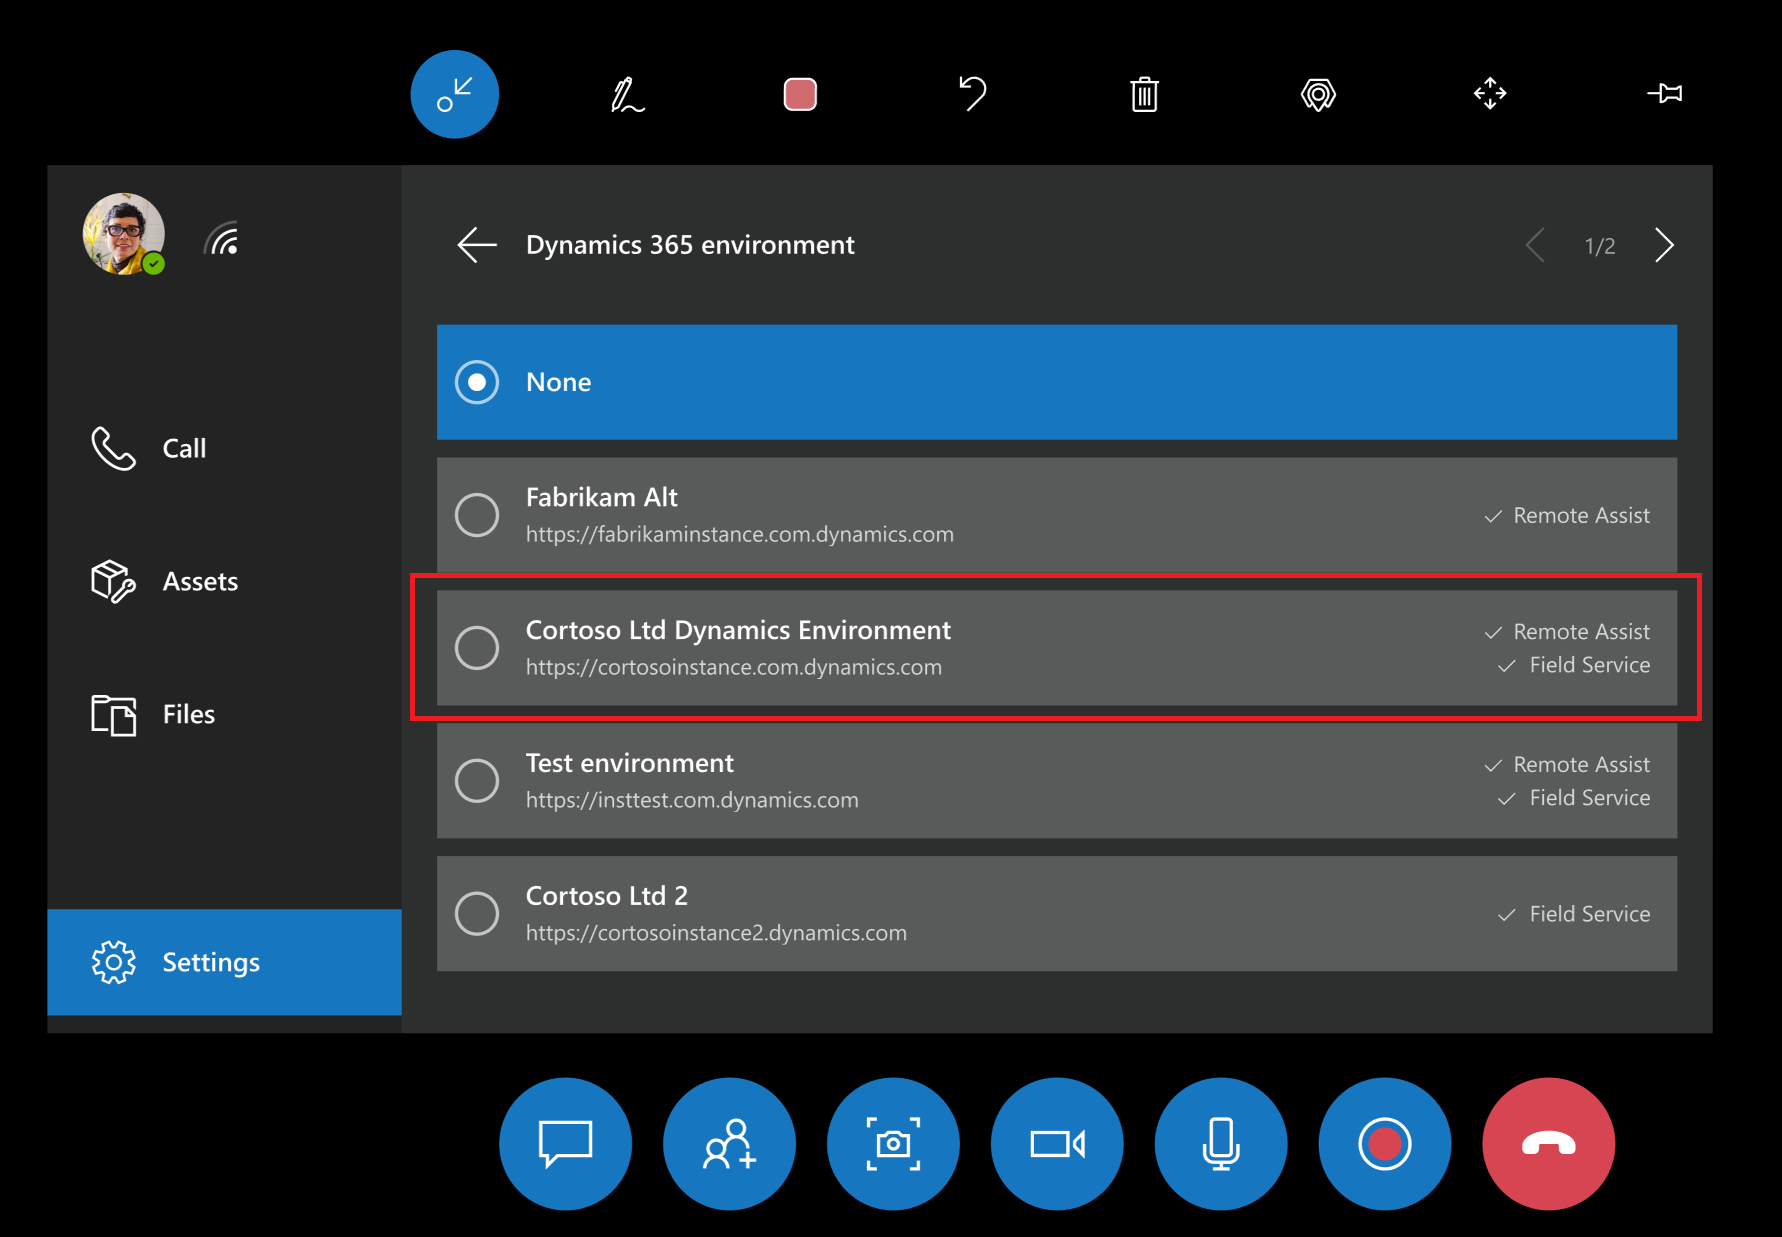 List of environments in Remote Assist settings menu on the HoloLens.